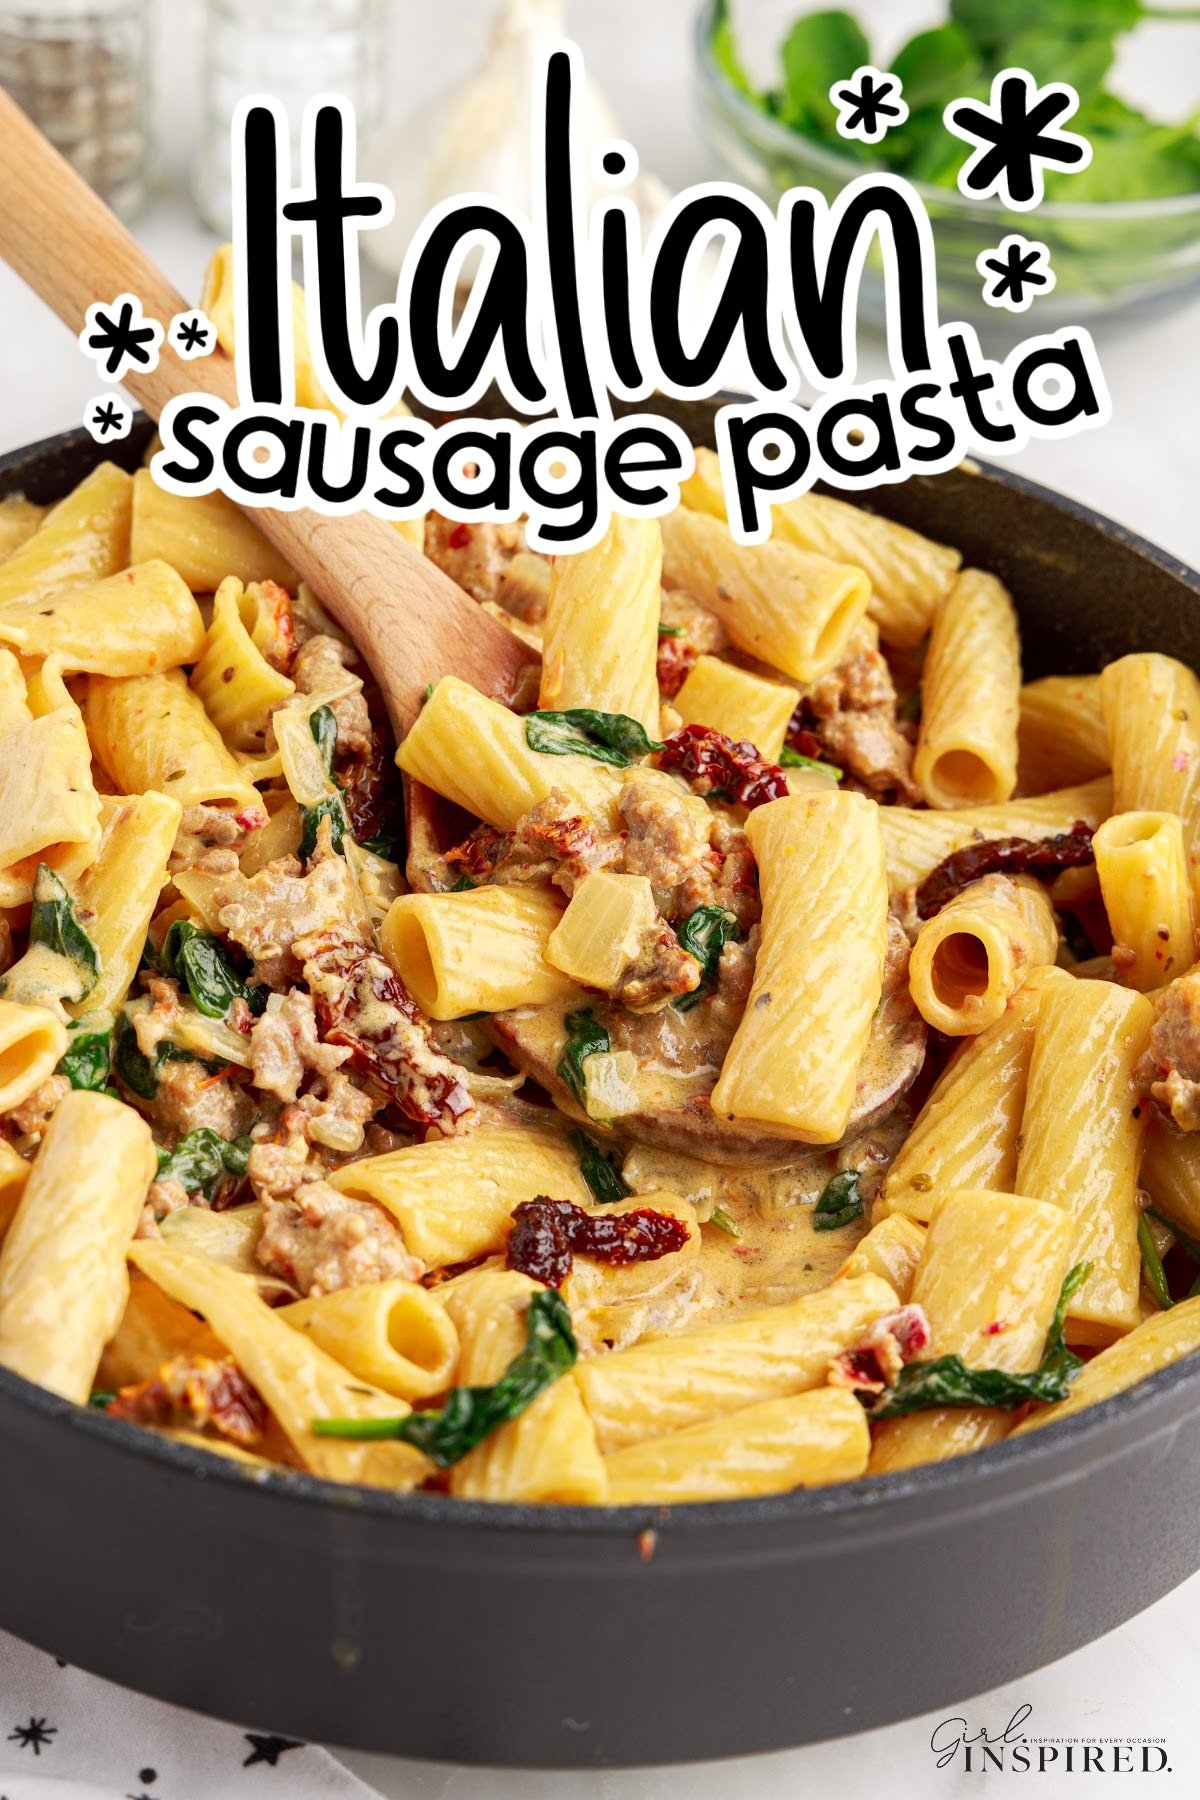 Italian sausage pasta in a large skillet with a wooden spoon, with text overlay.